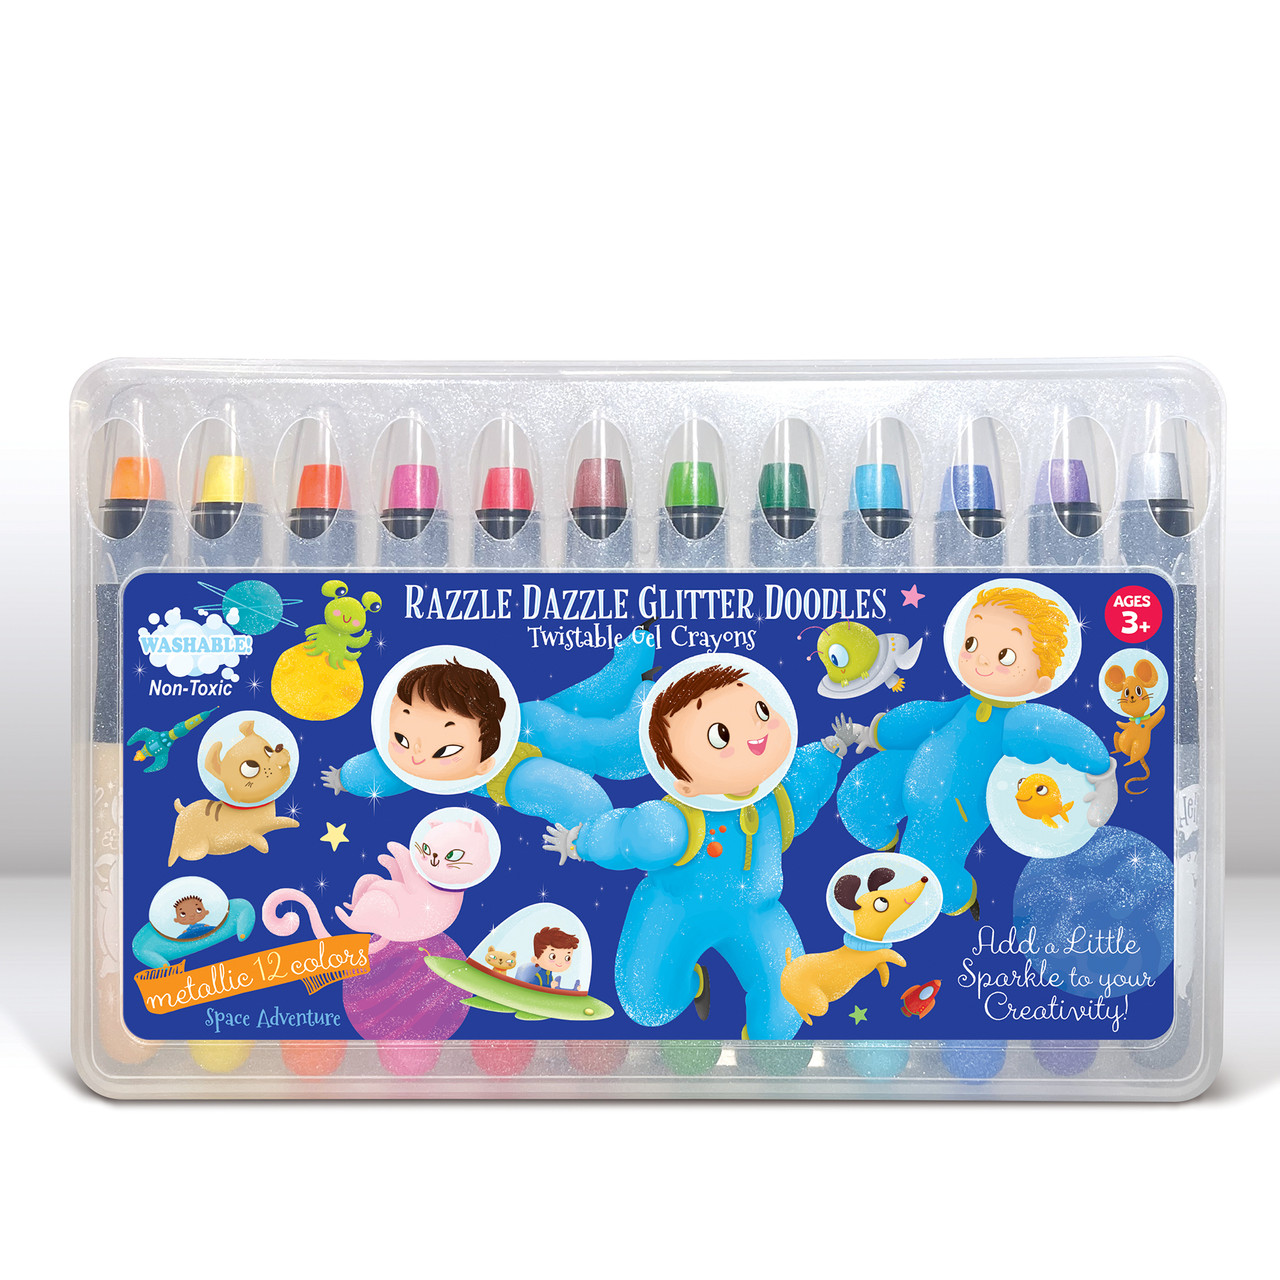 Blast Off to Creativity with The Piggy Company's Space Adventure Dry Erase Coloring Book & Glitter Doodle Gel Crayons 1